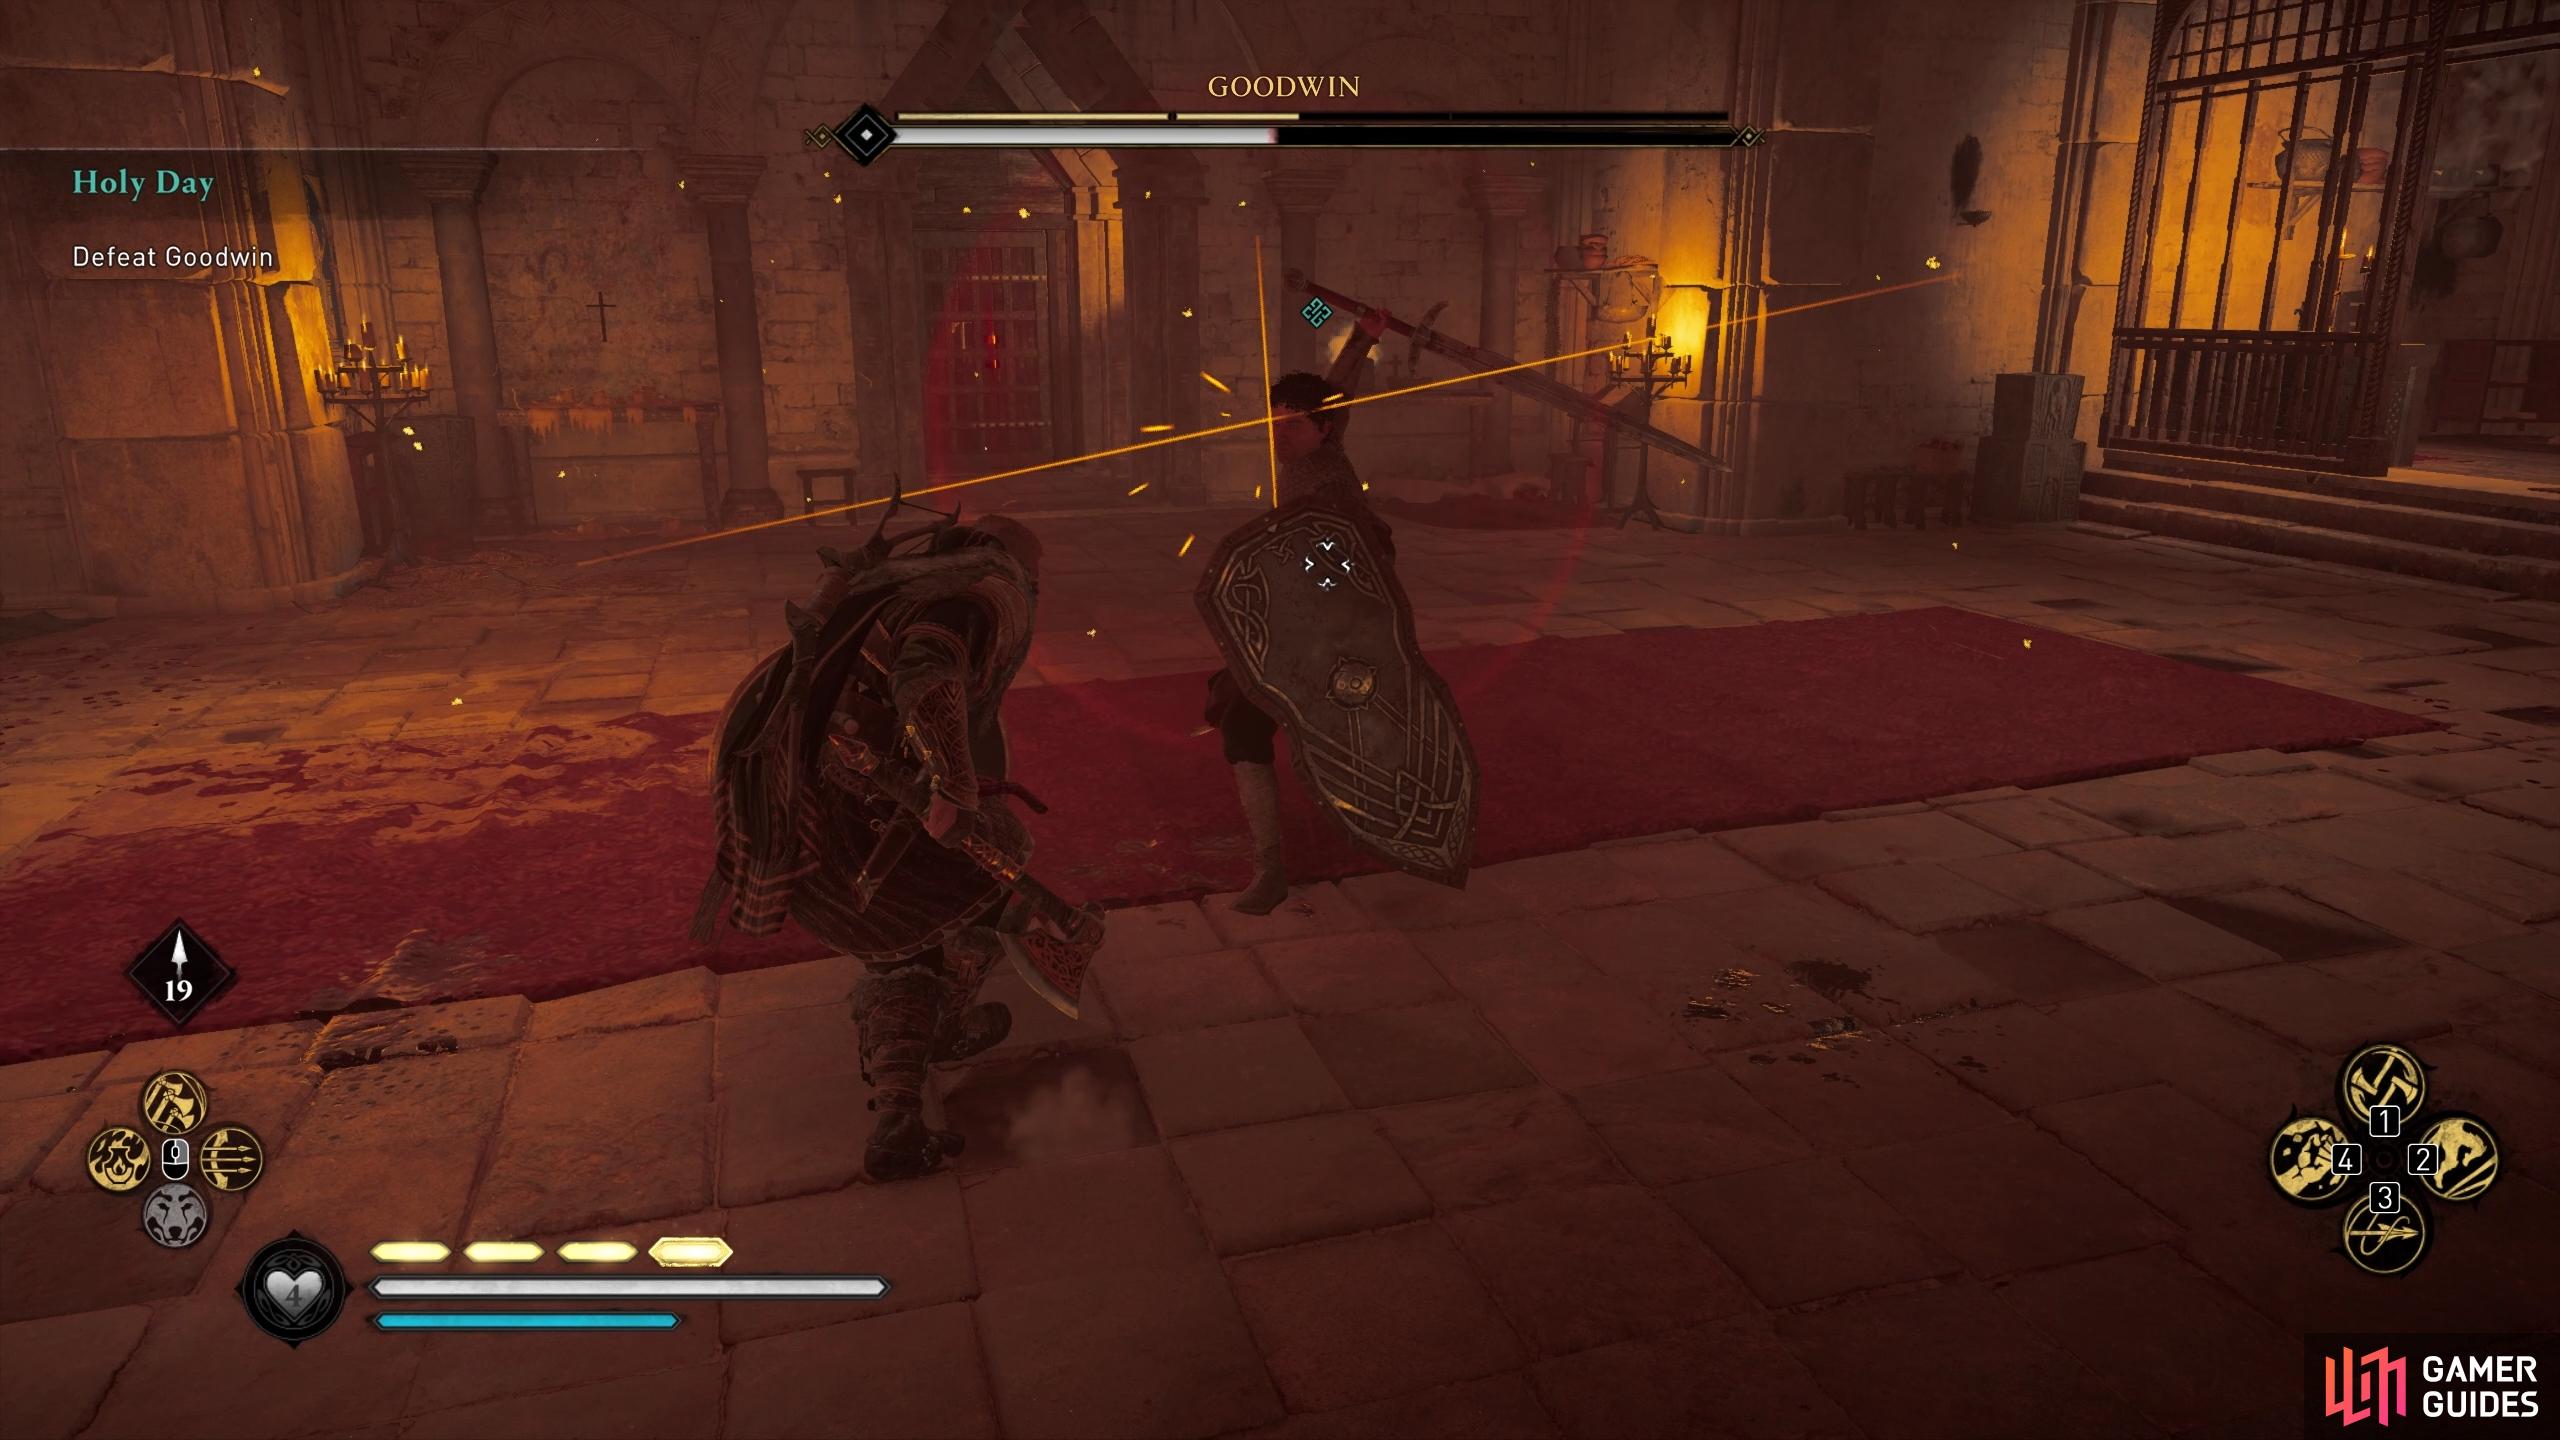 You can block or parry most of Goodwin's regular or yellow / orange attacks.